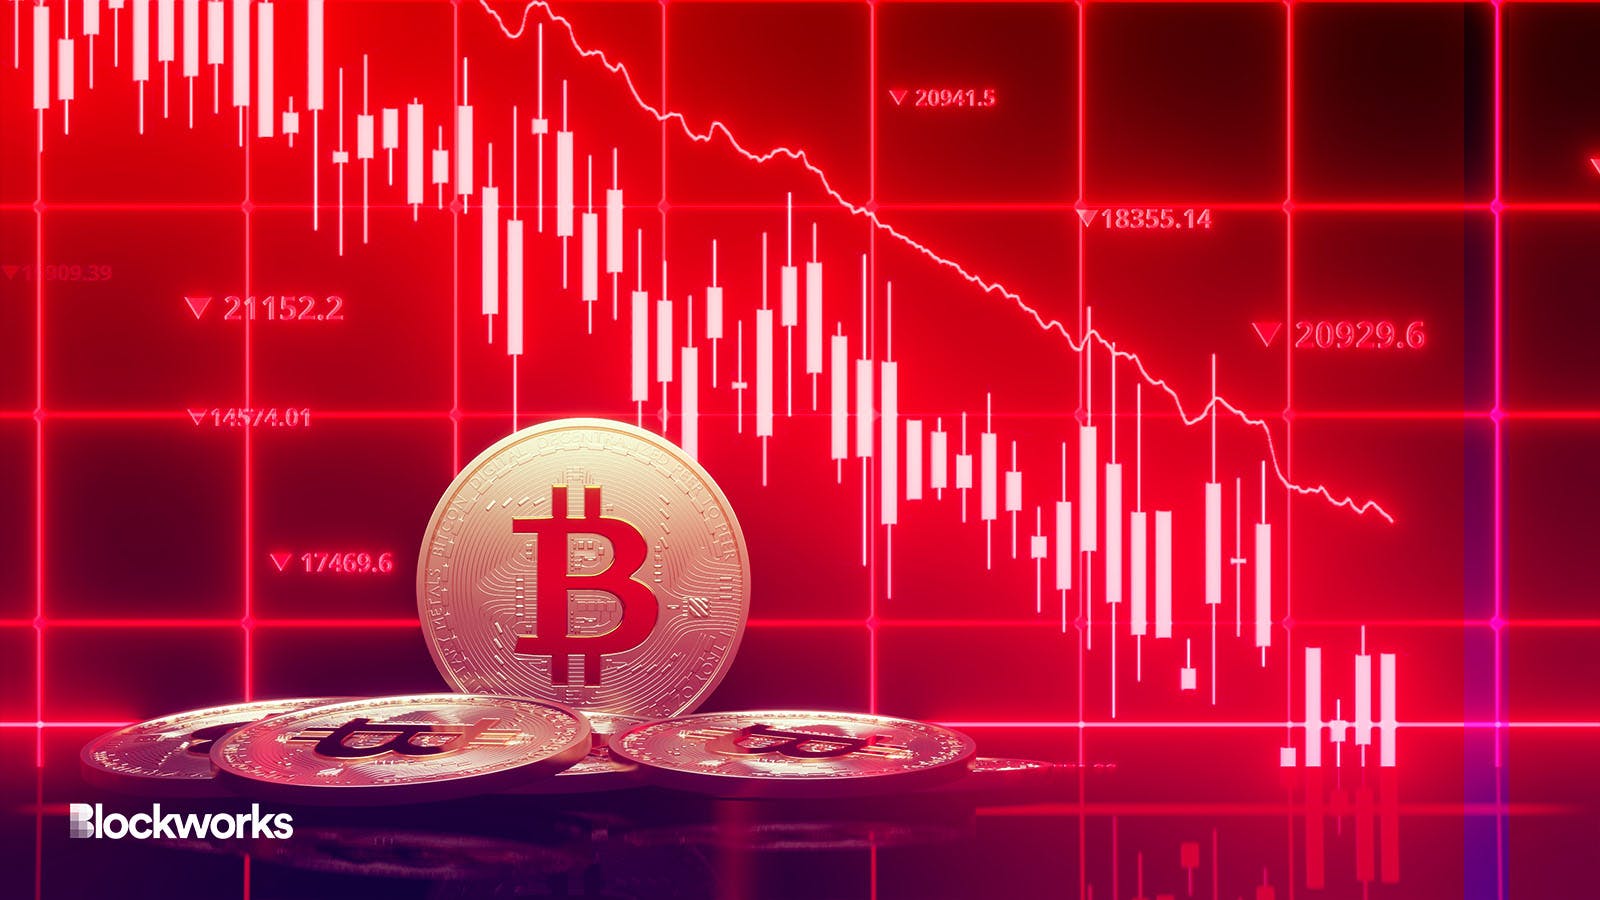 Bitcoin Price Analysts Eyeing $25K as Support Following Momentum